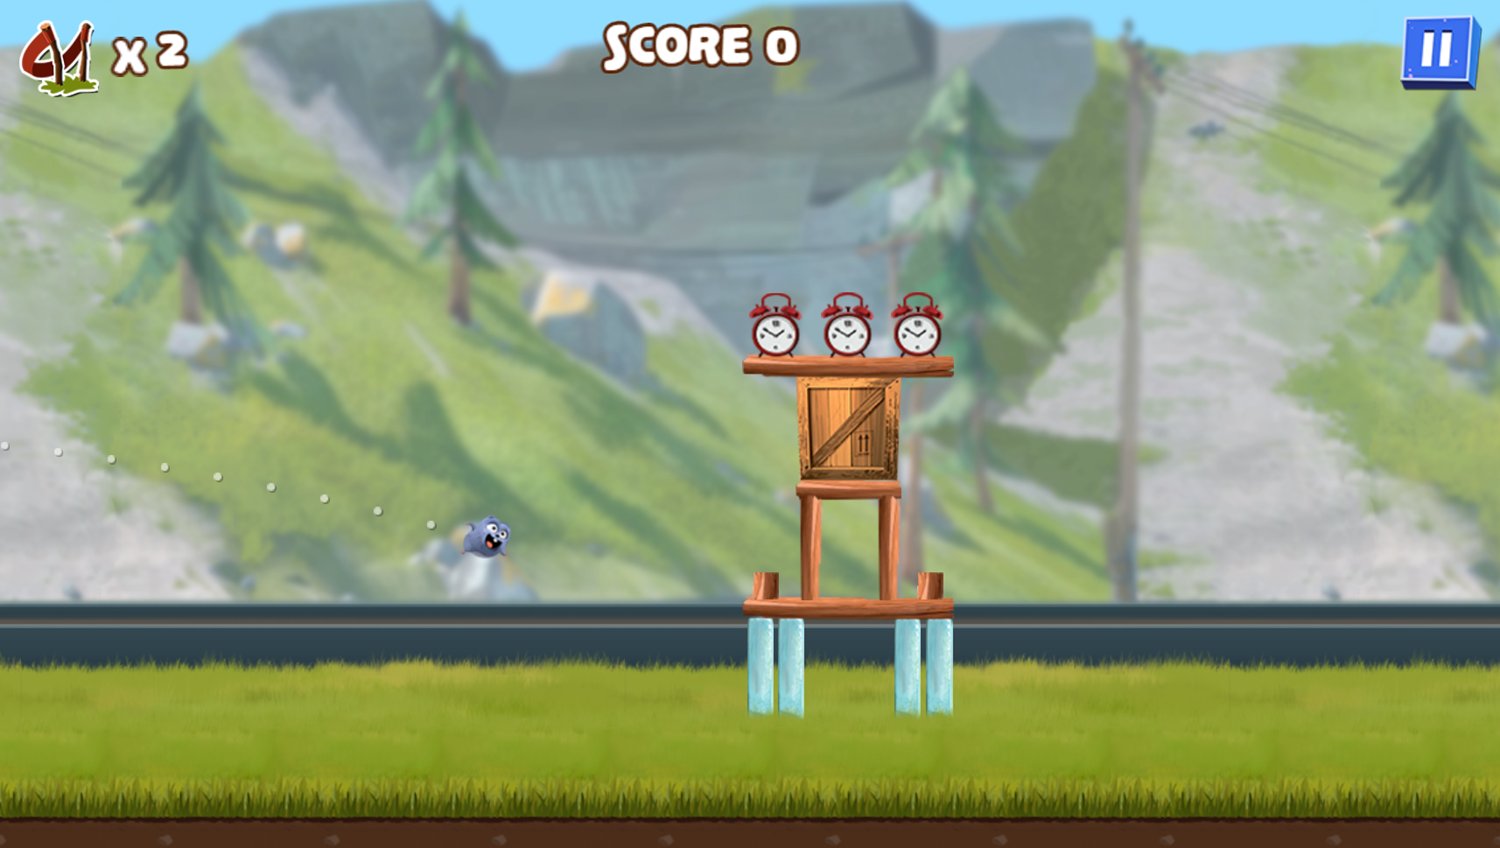 Grizzy and the Lemmings Lemmings Launch Game Play Screenshot.